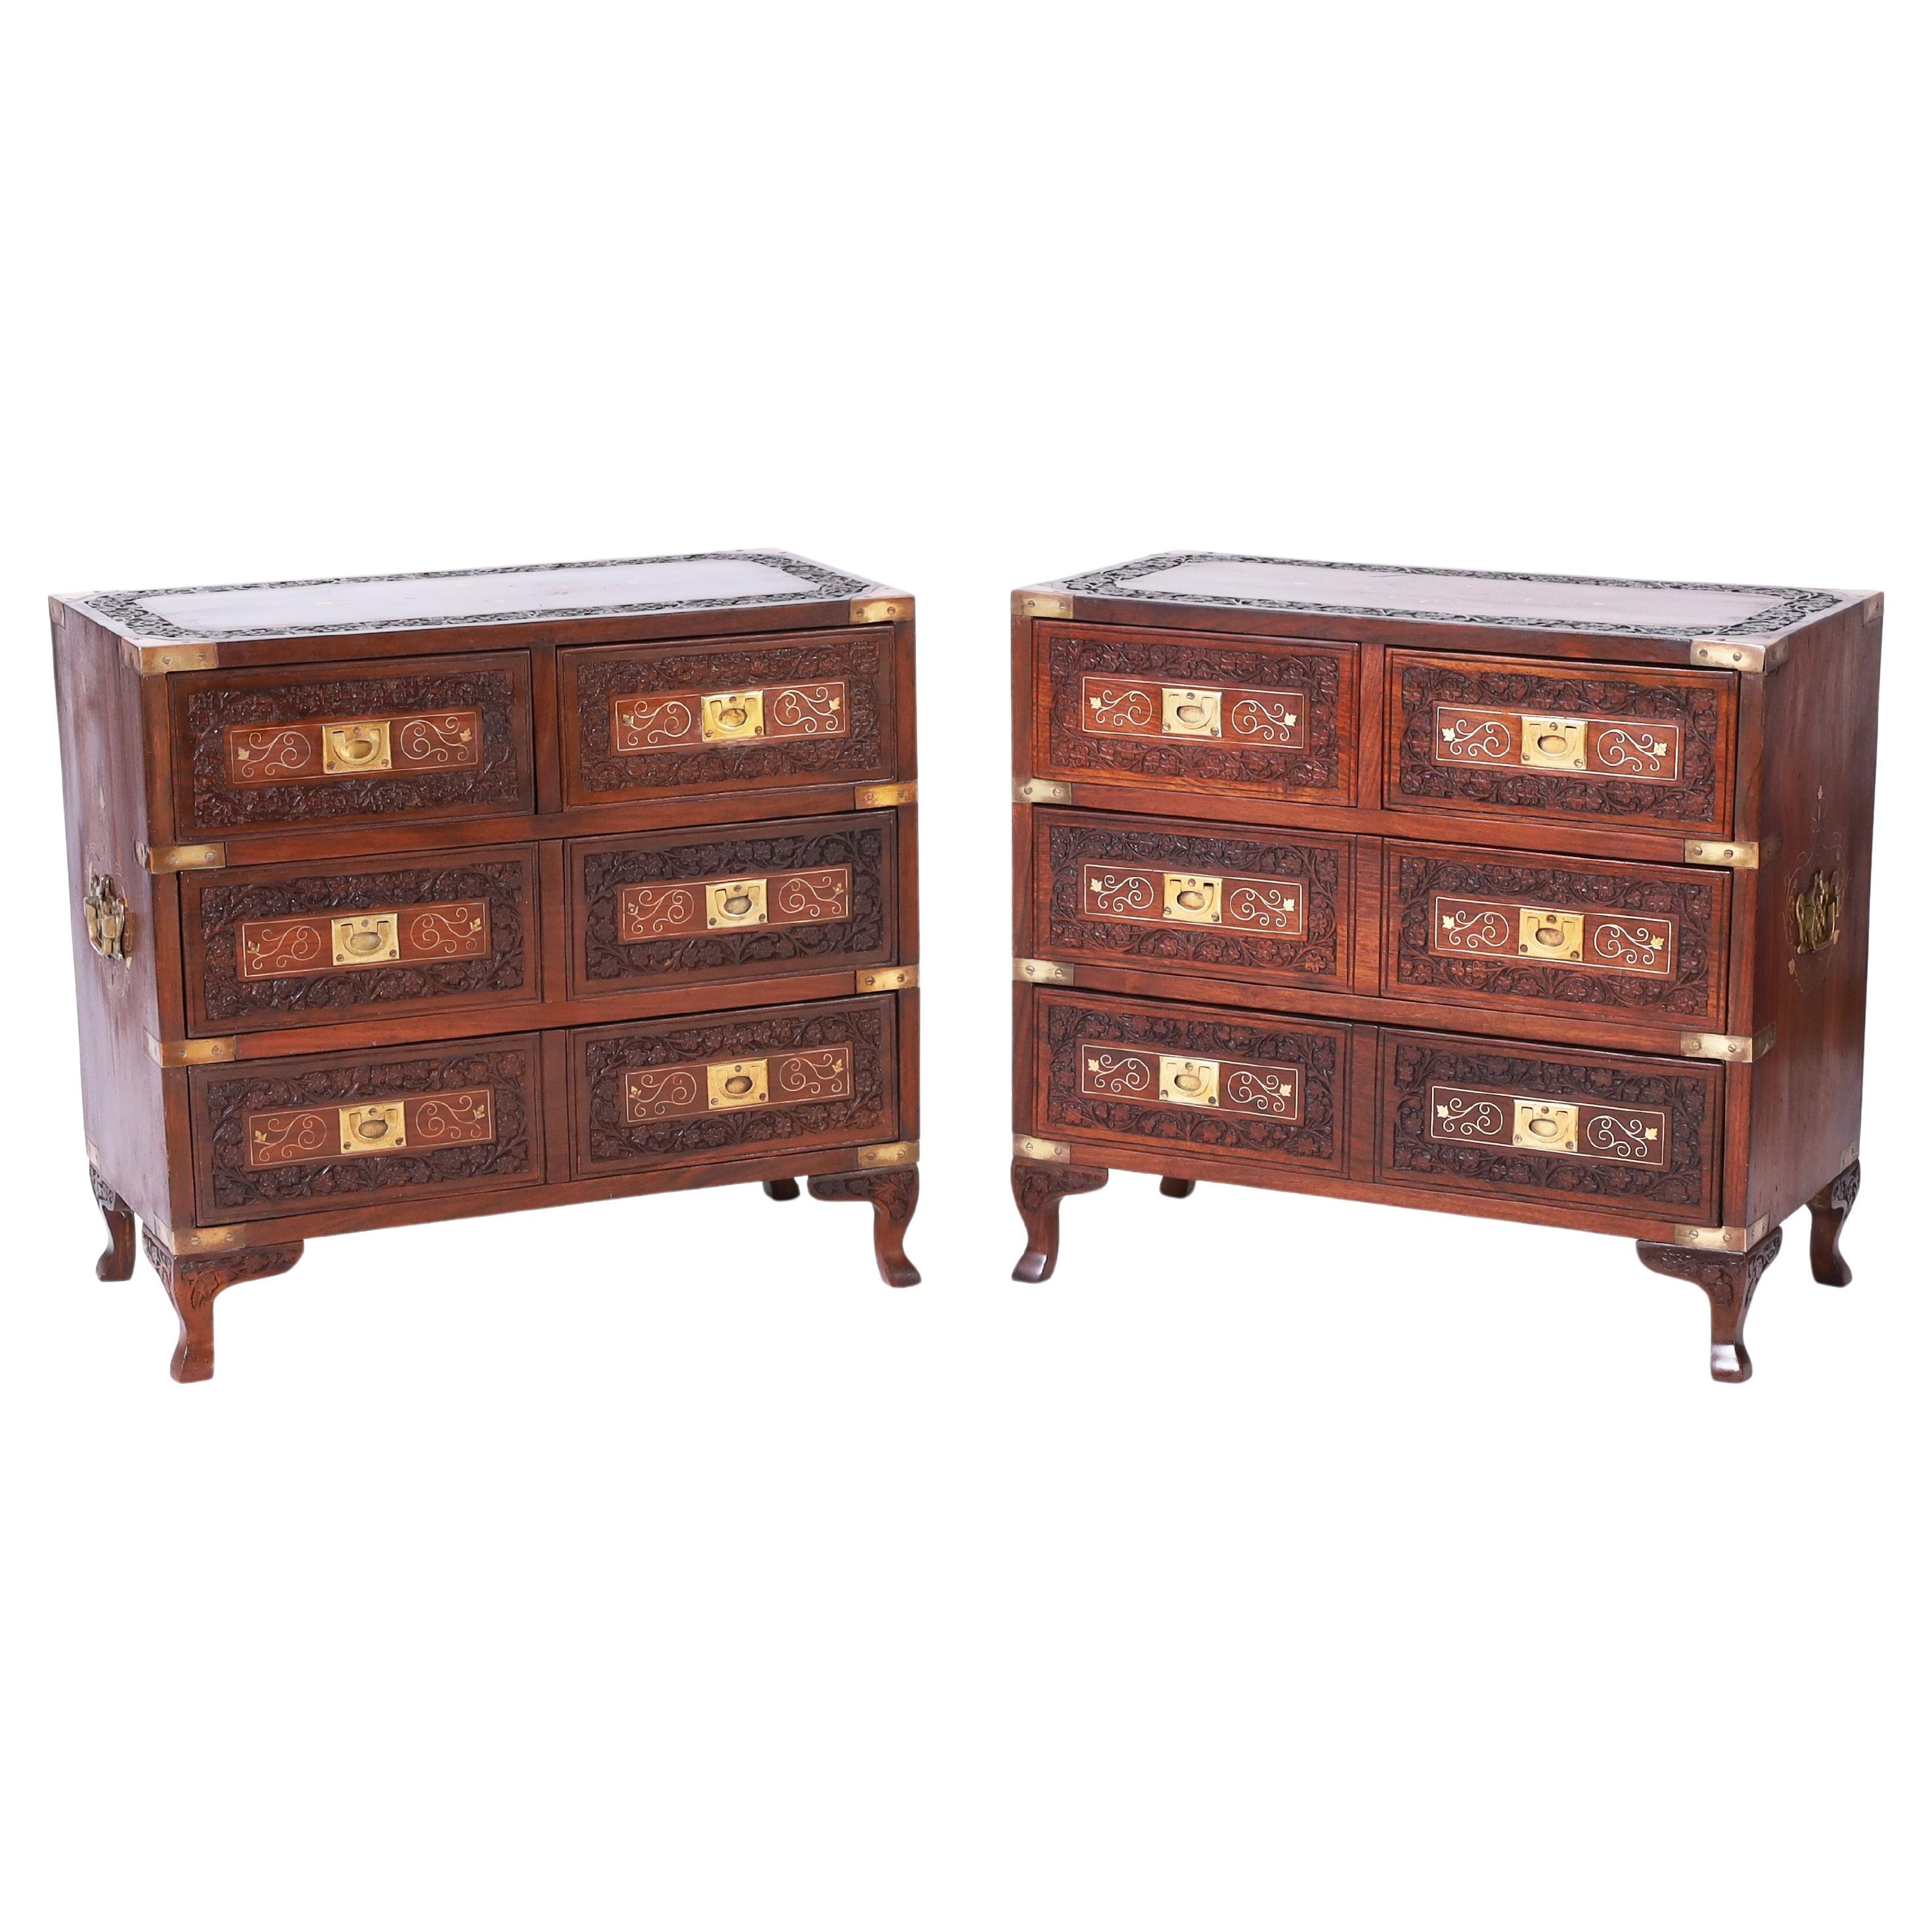 Near Antique Pair of Anglo Indian Rosewood Campaign Inlaid Stands or Chests For Sale